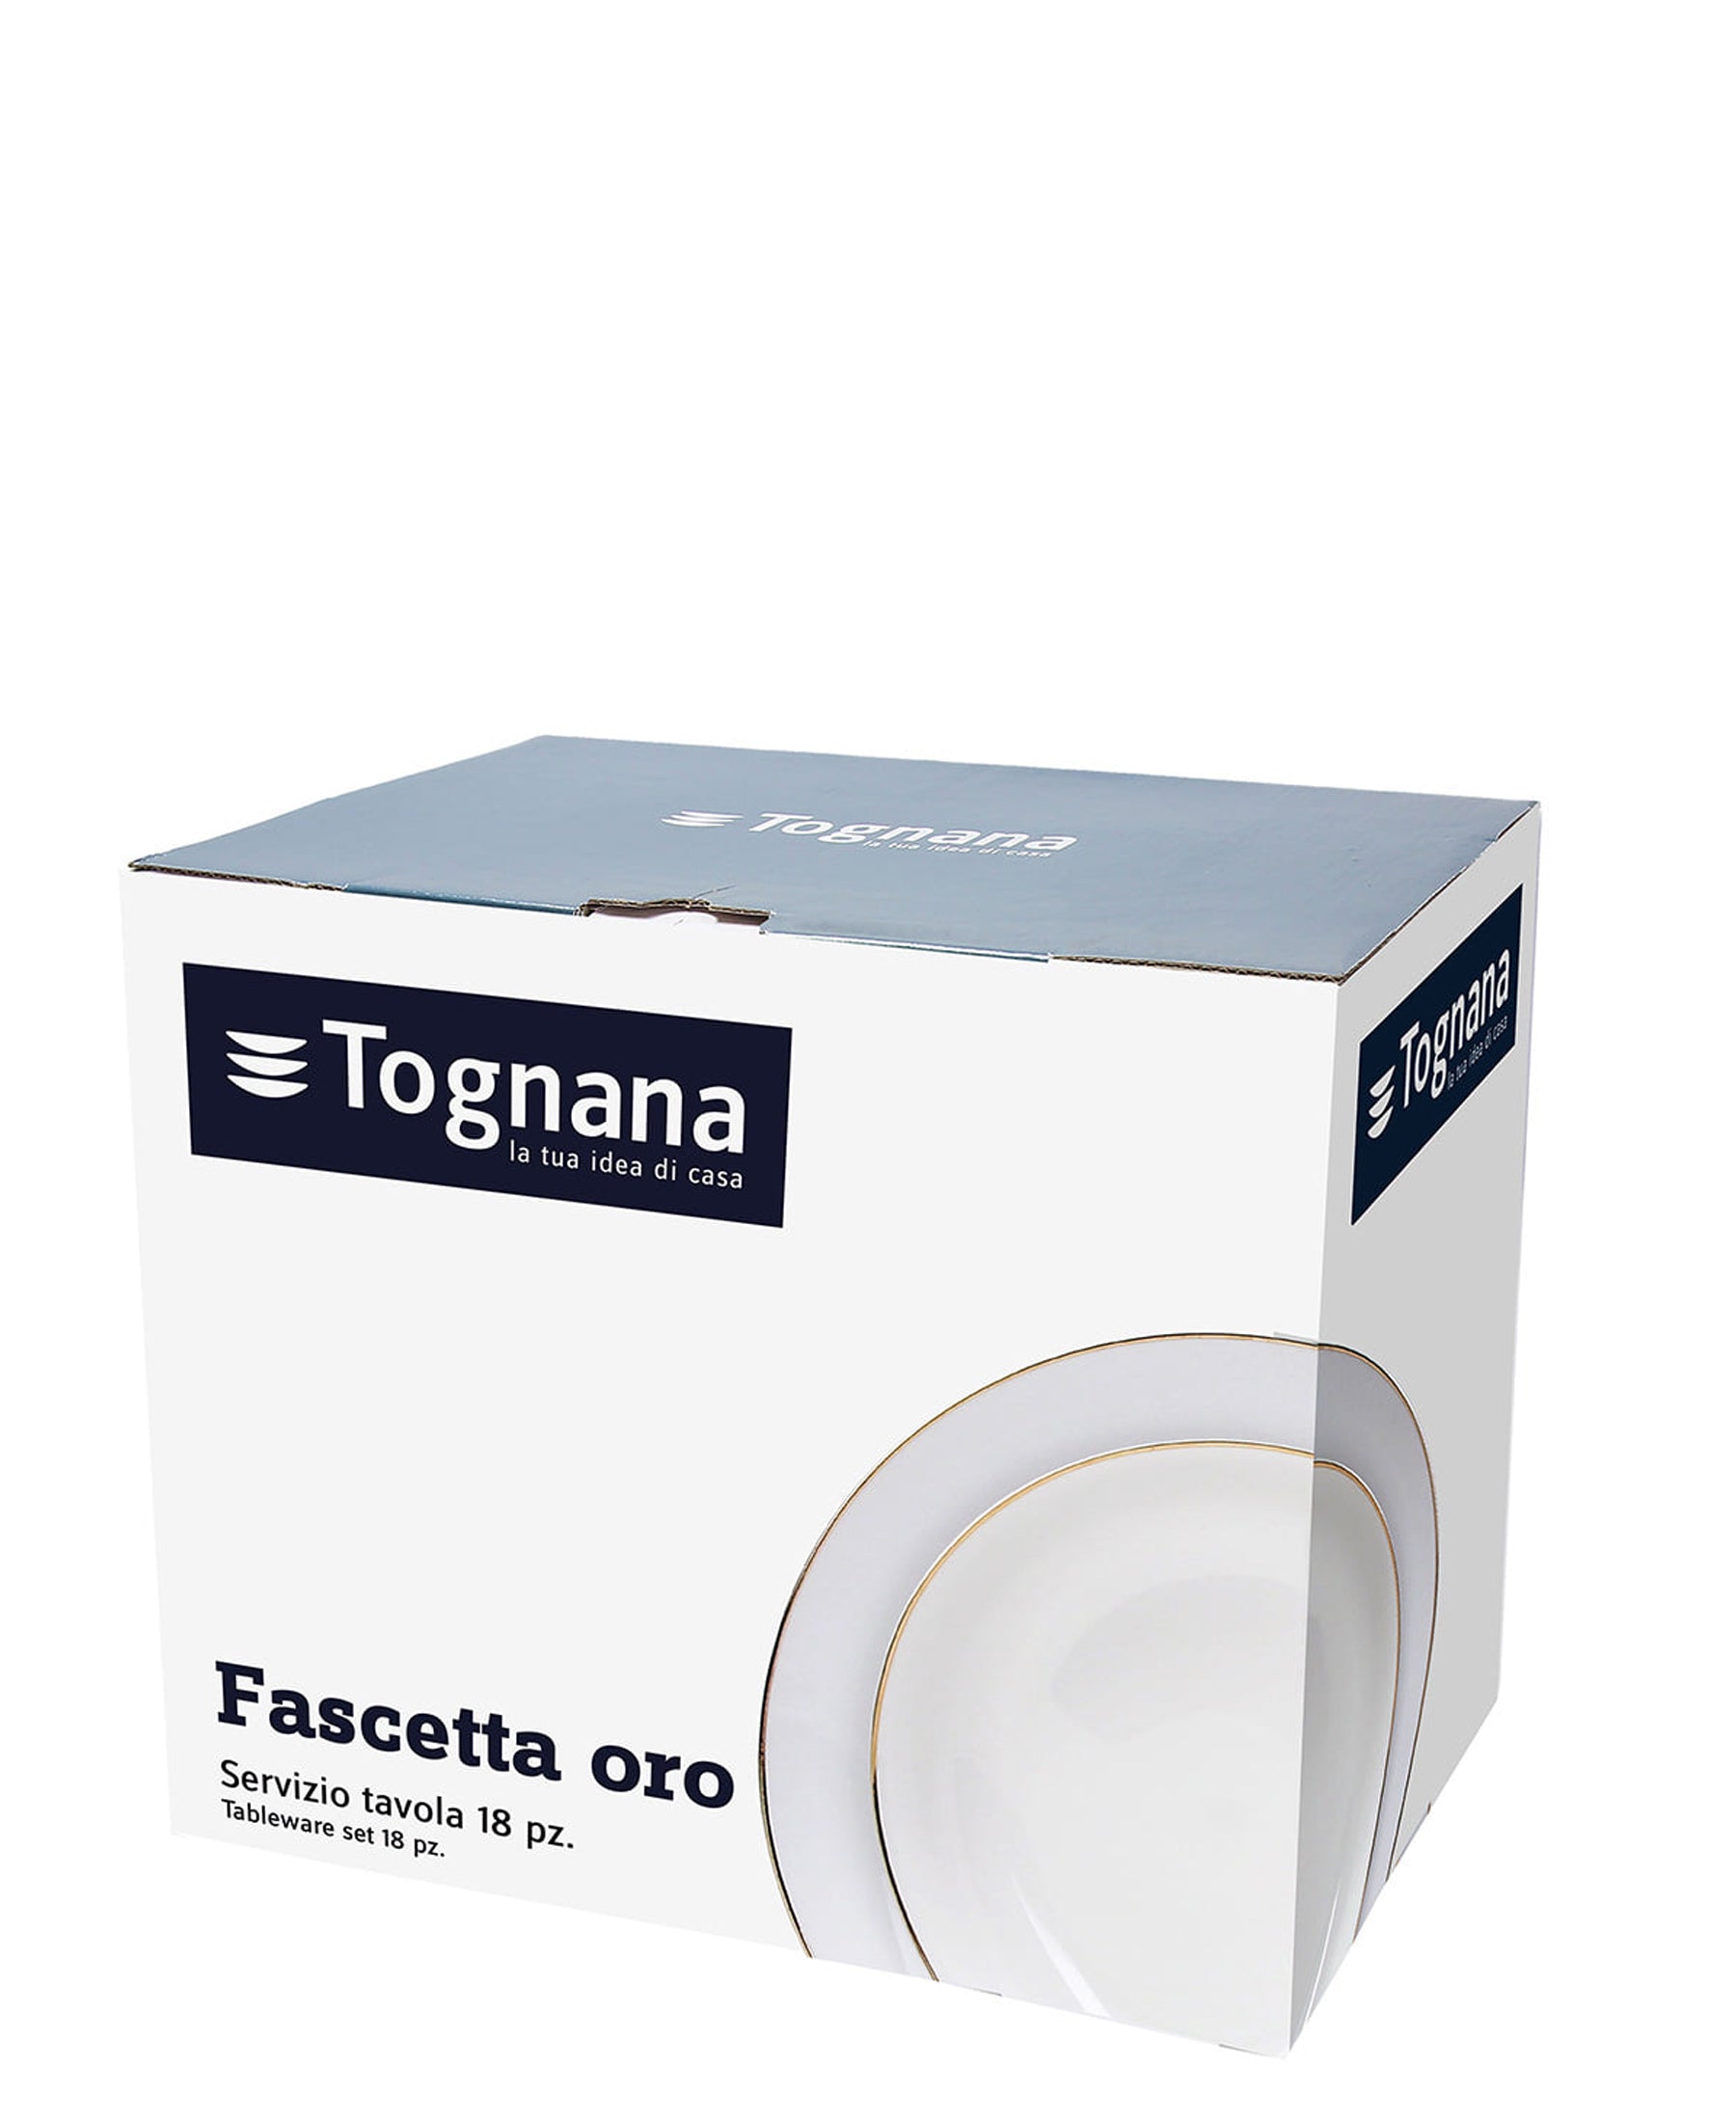 Tognana Fascetta Oro 18 Piece Dinner Set - White And Gold